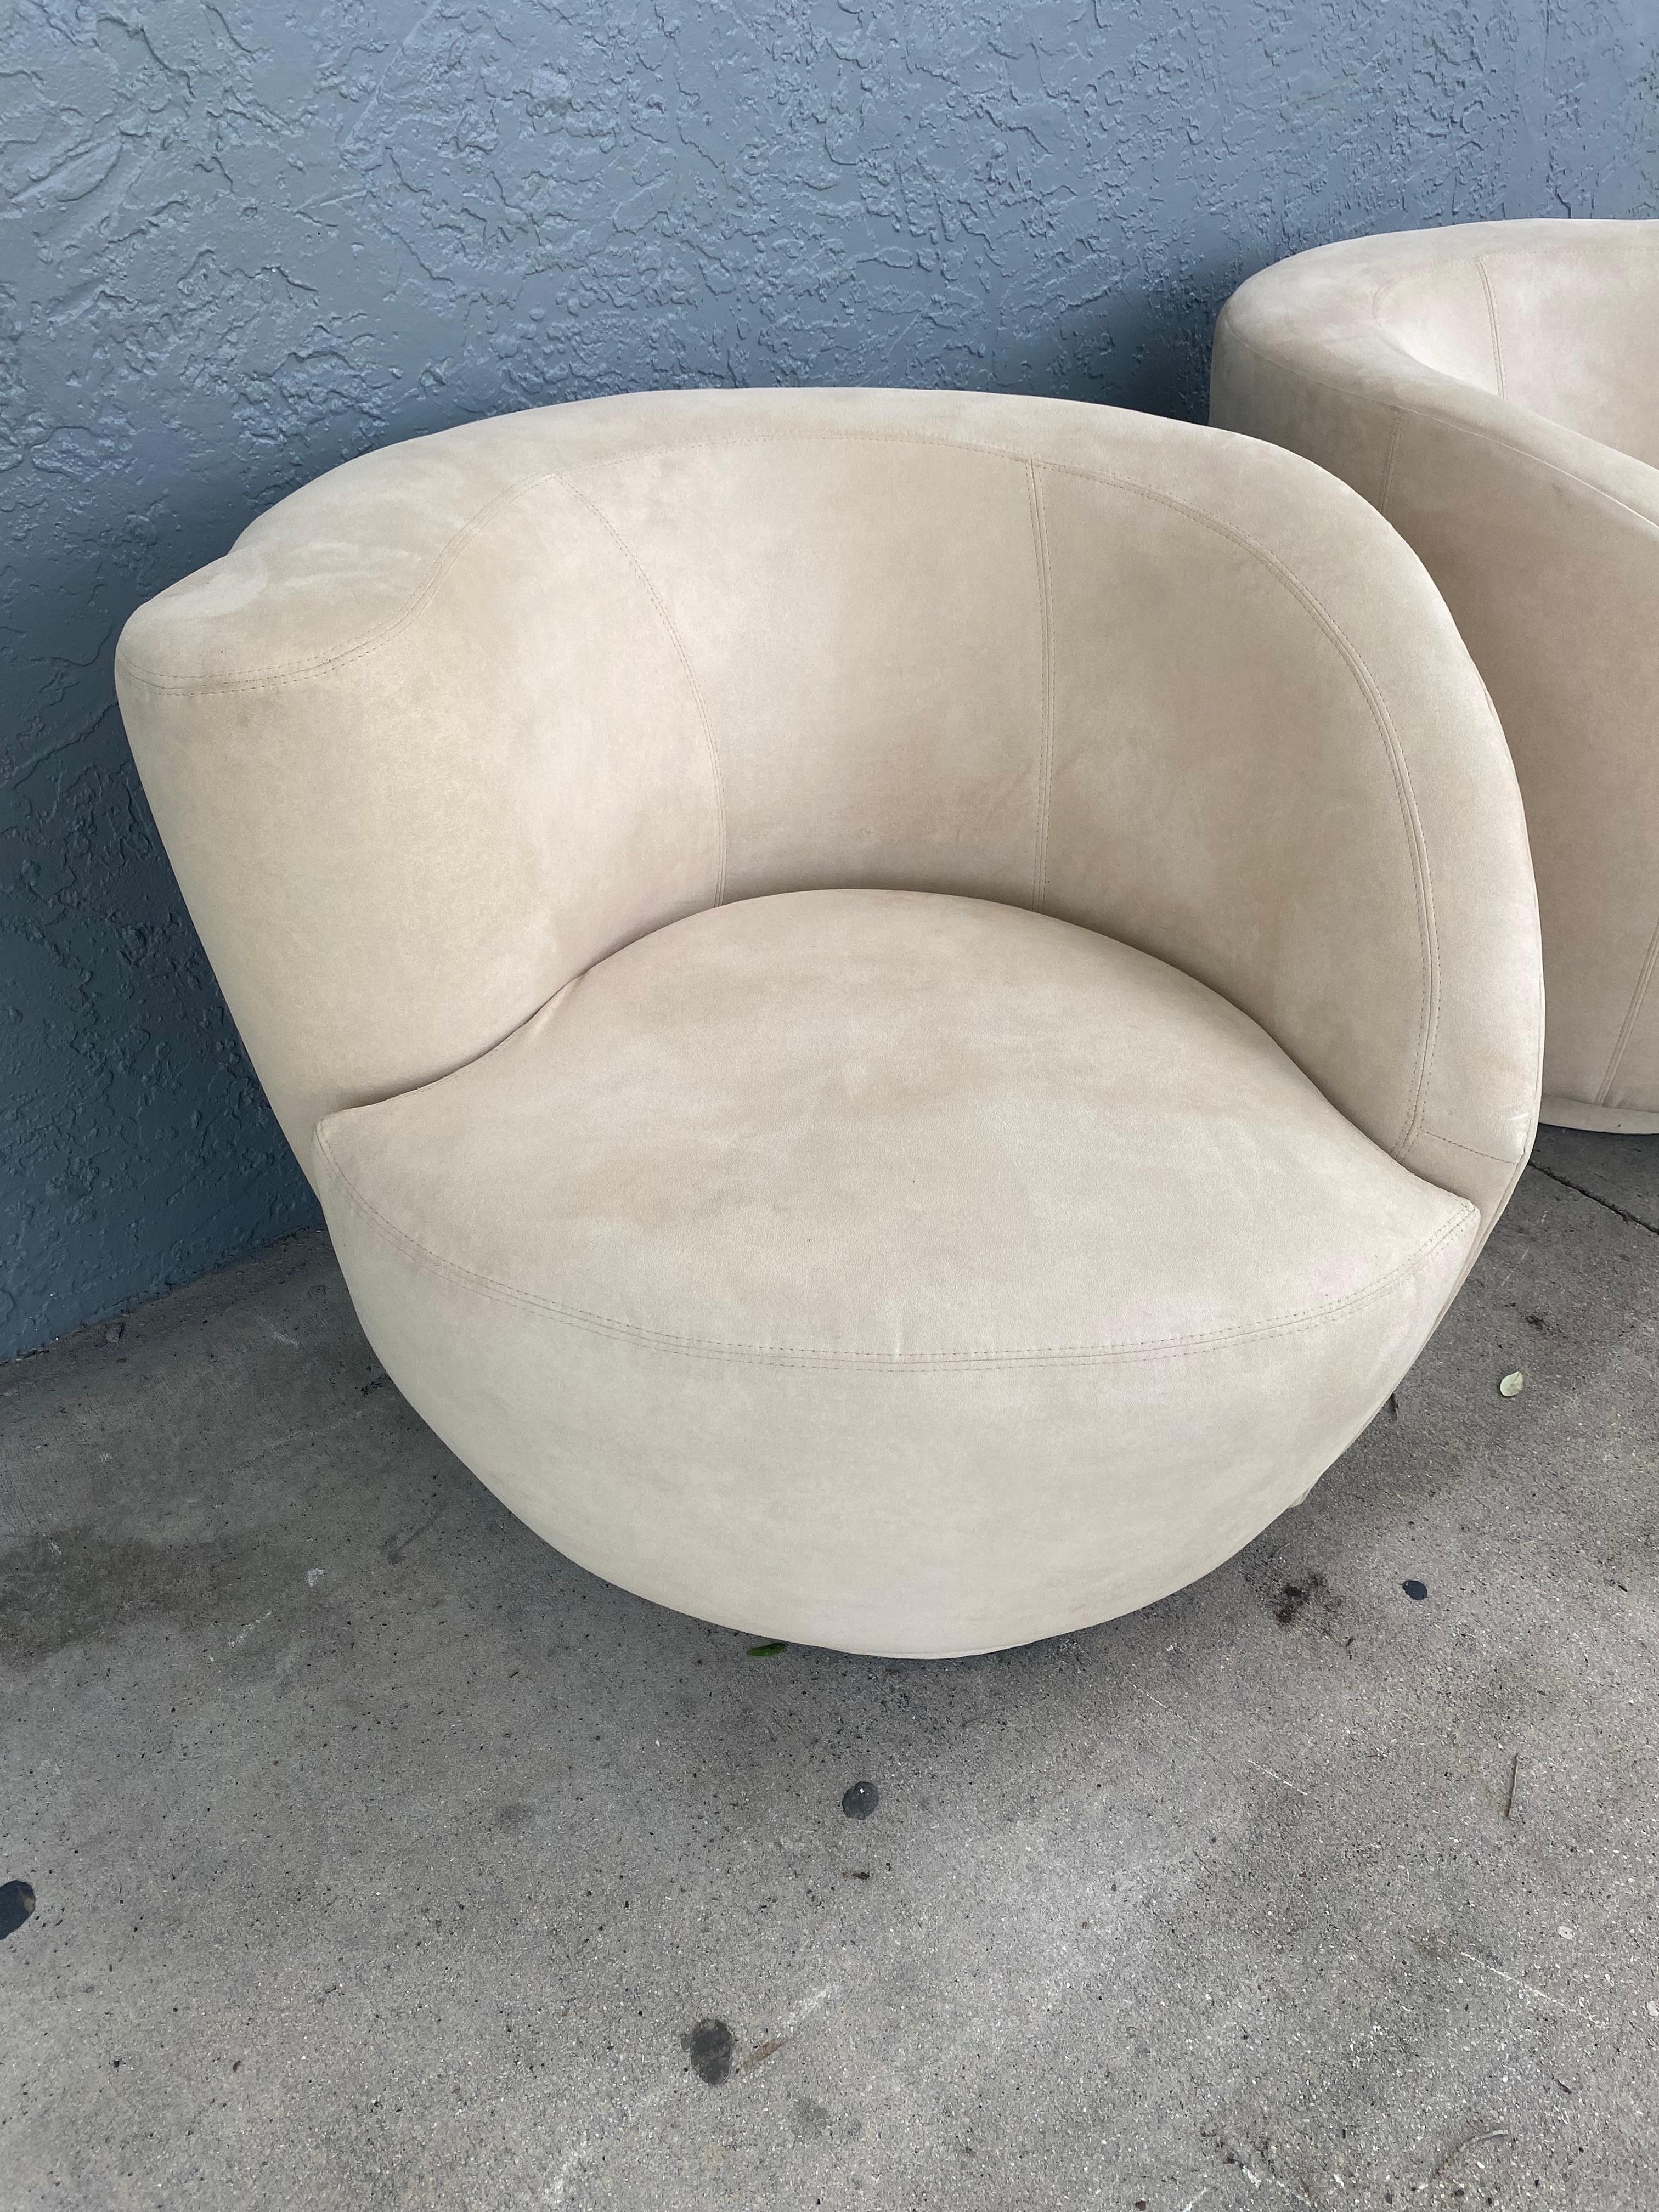 1980s Light Beige Directional Nautilus Swivel Chairs, Set of 2 For Sale 1